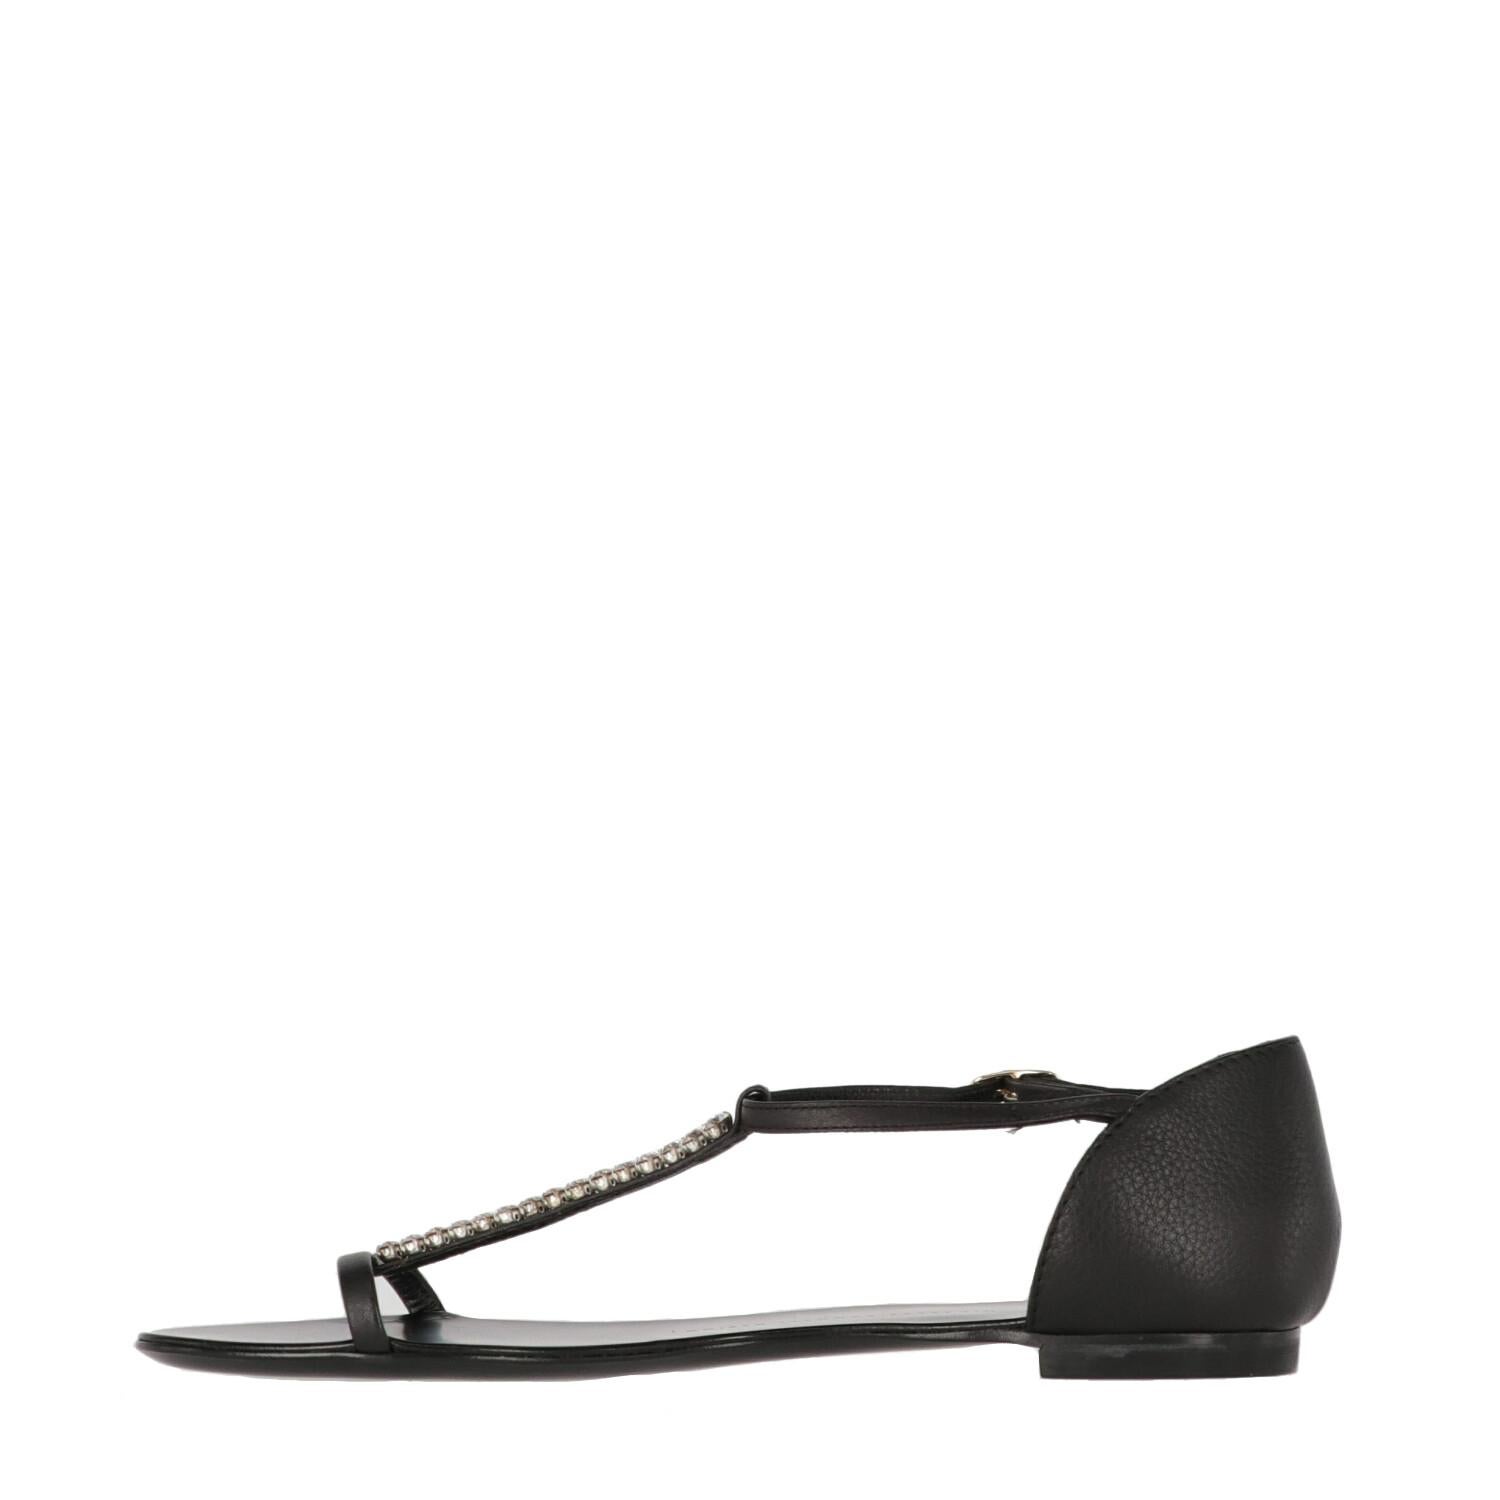 A.N.G.E.L.O. Vintage - ITALY

Giuseppe Zanotti black genuine leather flat sandals. Front thin band, ankle T-strap fastening, rhinestones embellishment and covered heel.

The item shows slight signs of wear on the insole, as shown in the